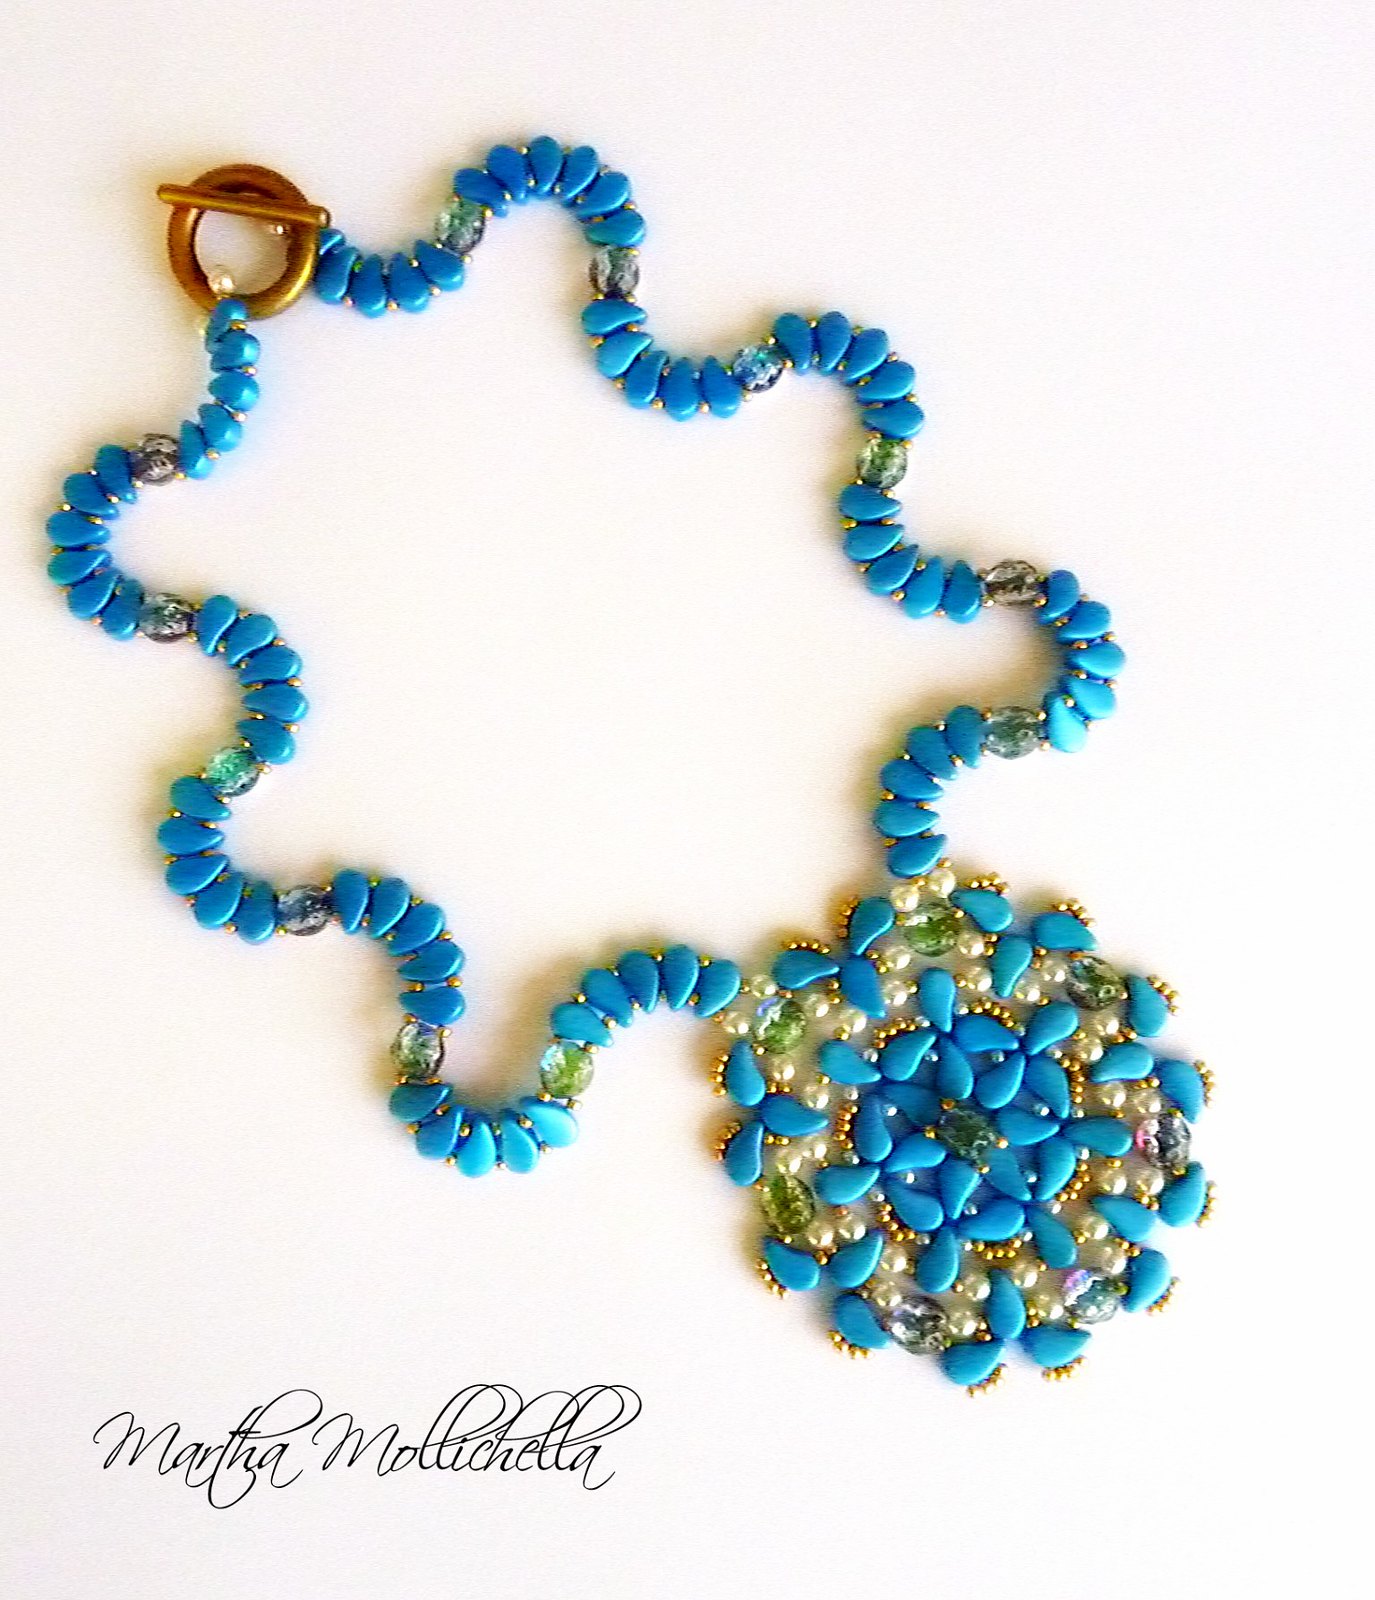 Handmade necklace made with paisley beads and two holes baroque cabochon Martha Mollichella design